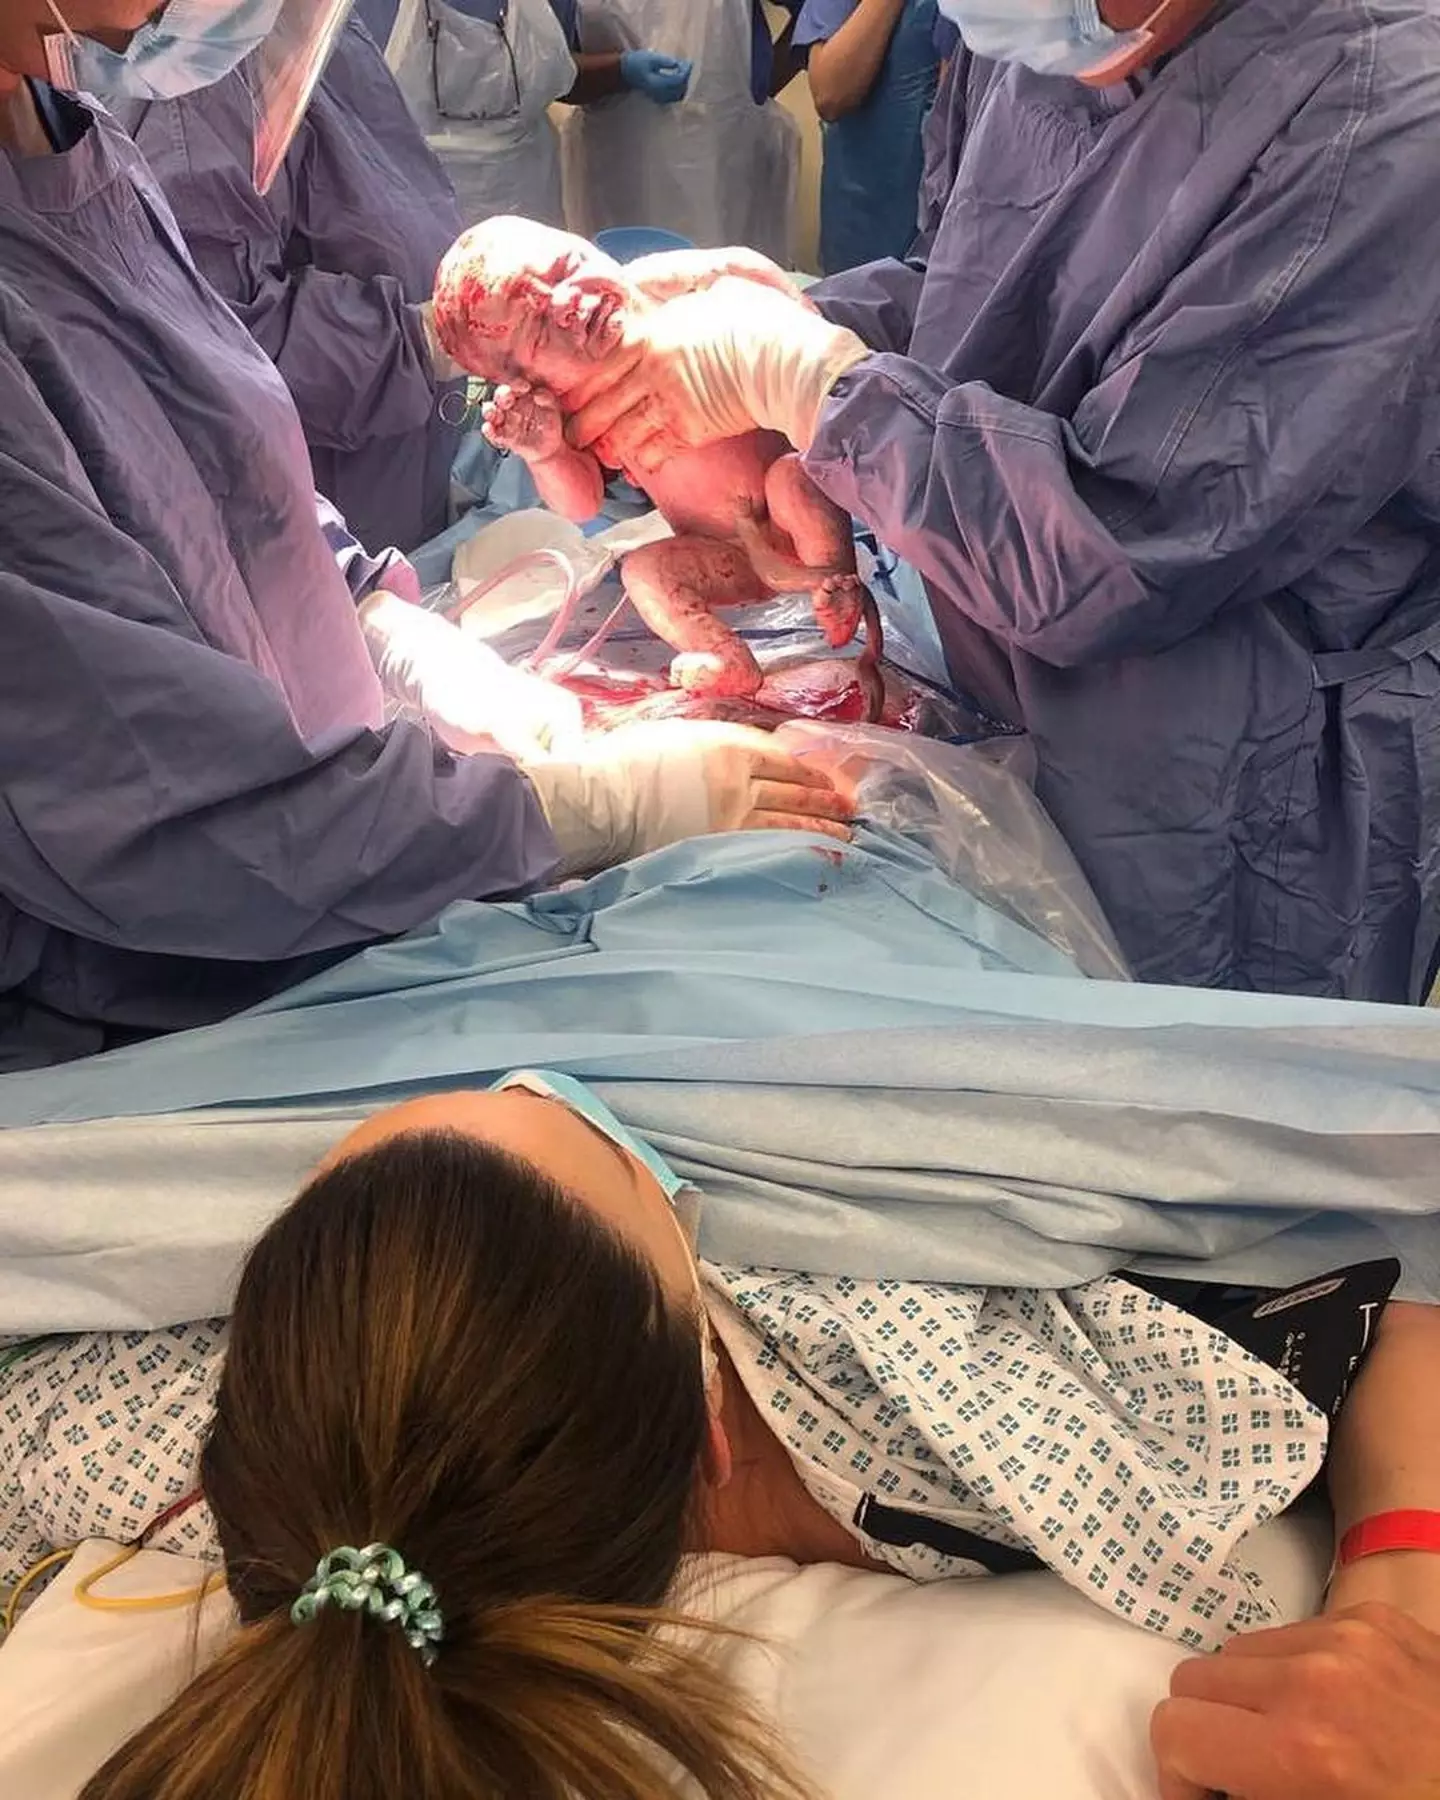 Maria Fowler shared pictures from her c-section on Instagram (